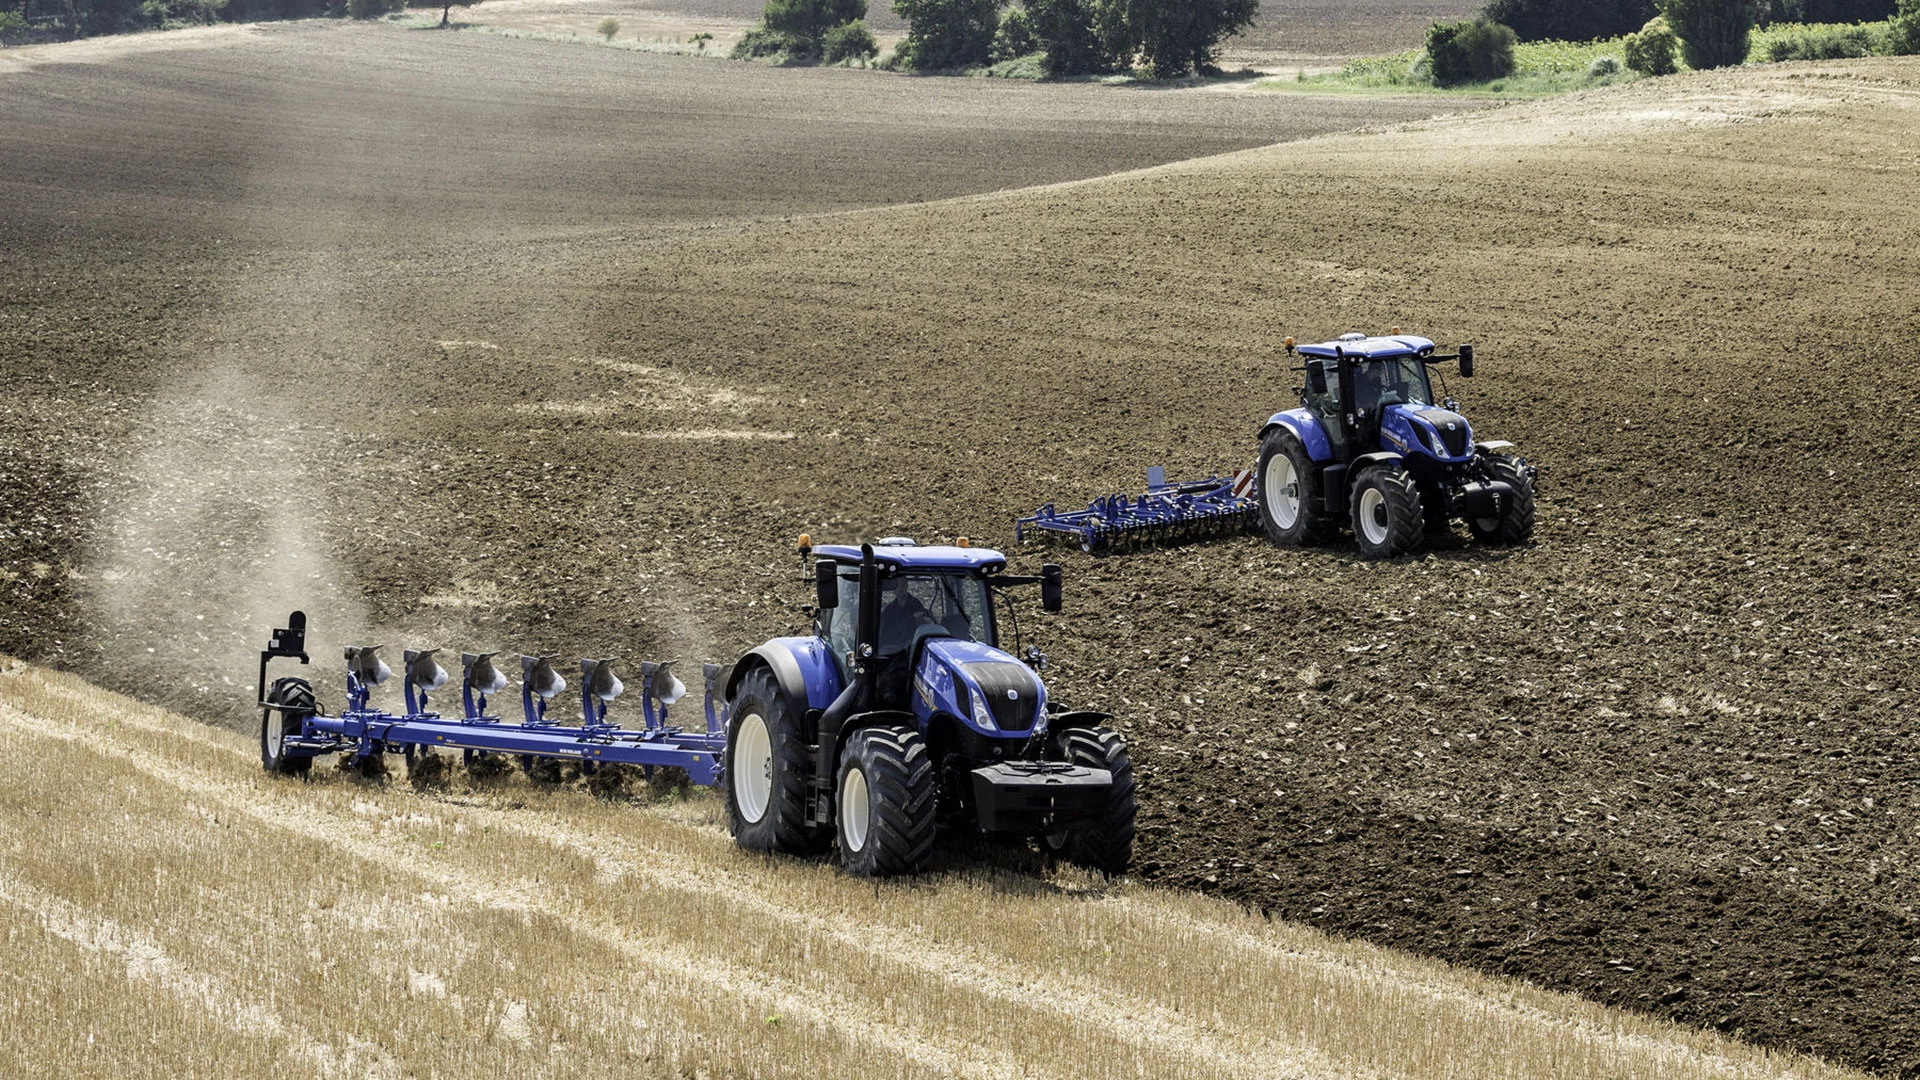 Two New Holland tractors in a vast field, one actively ploughing with a multi-furrow plough.